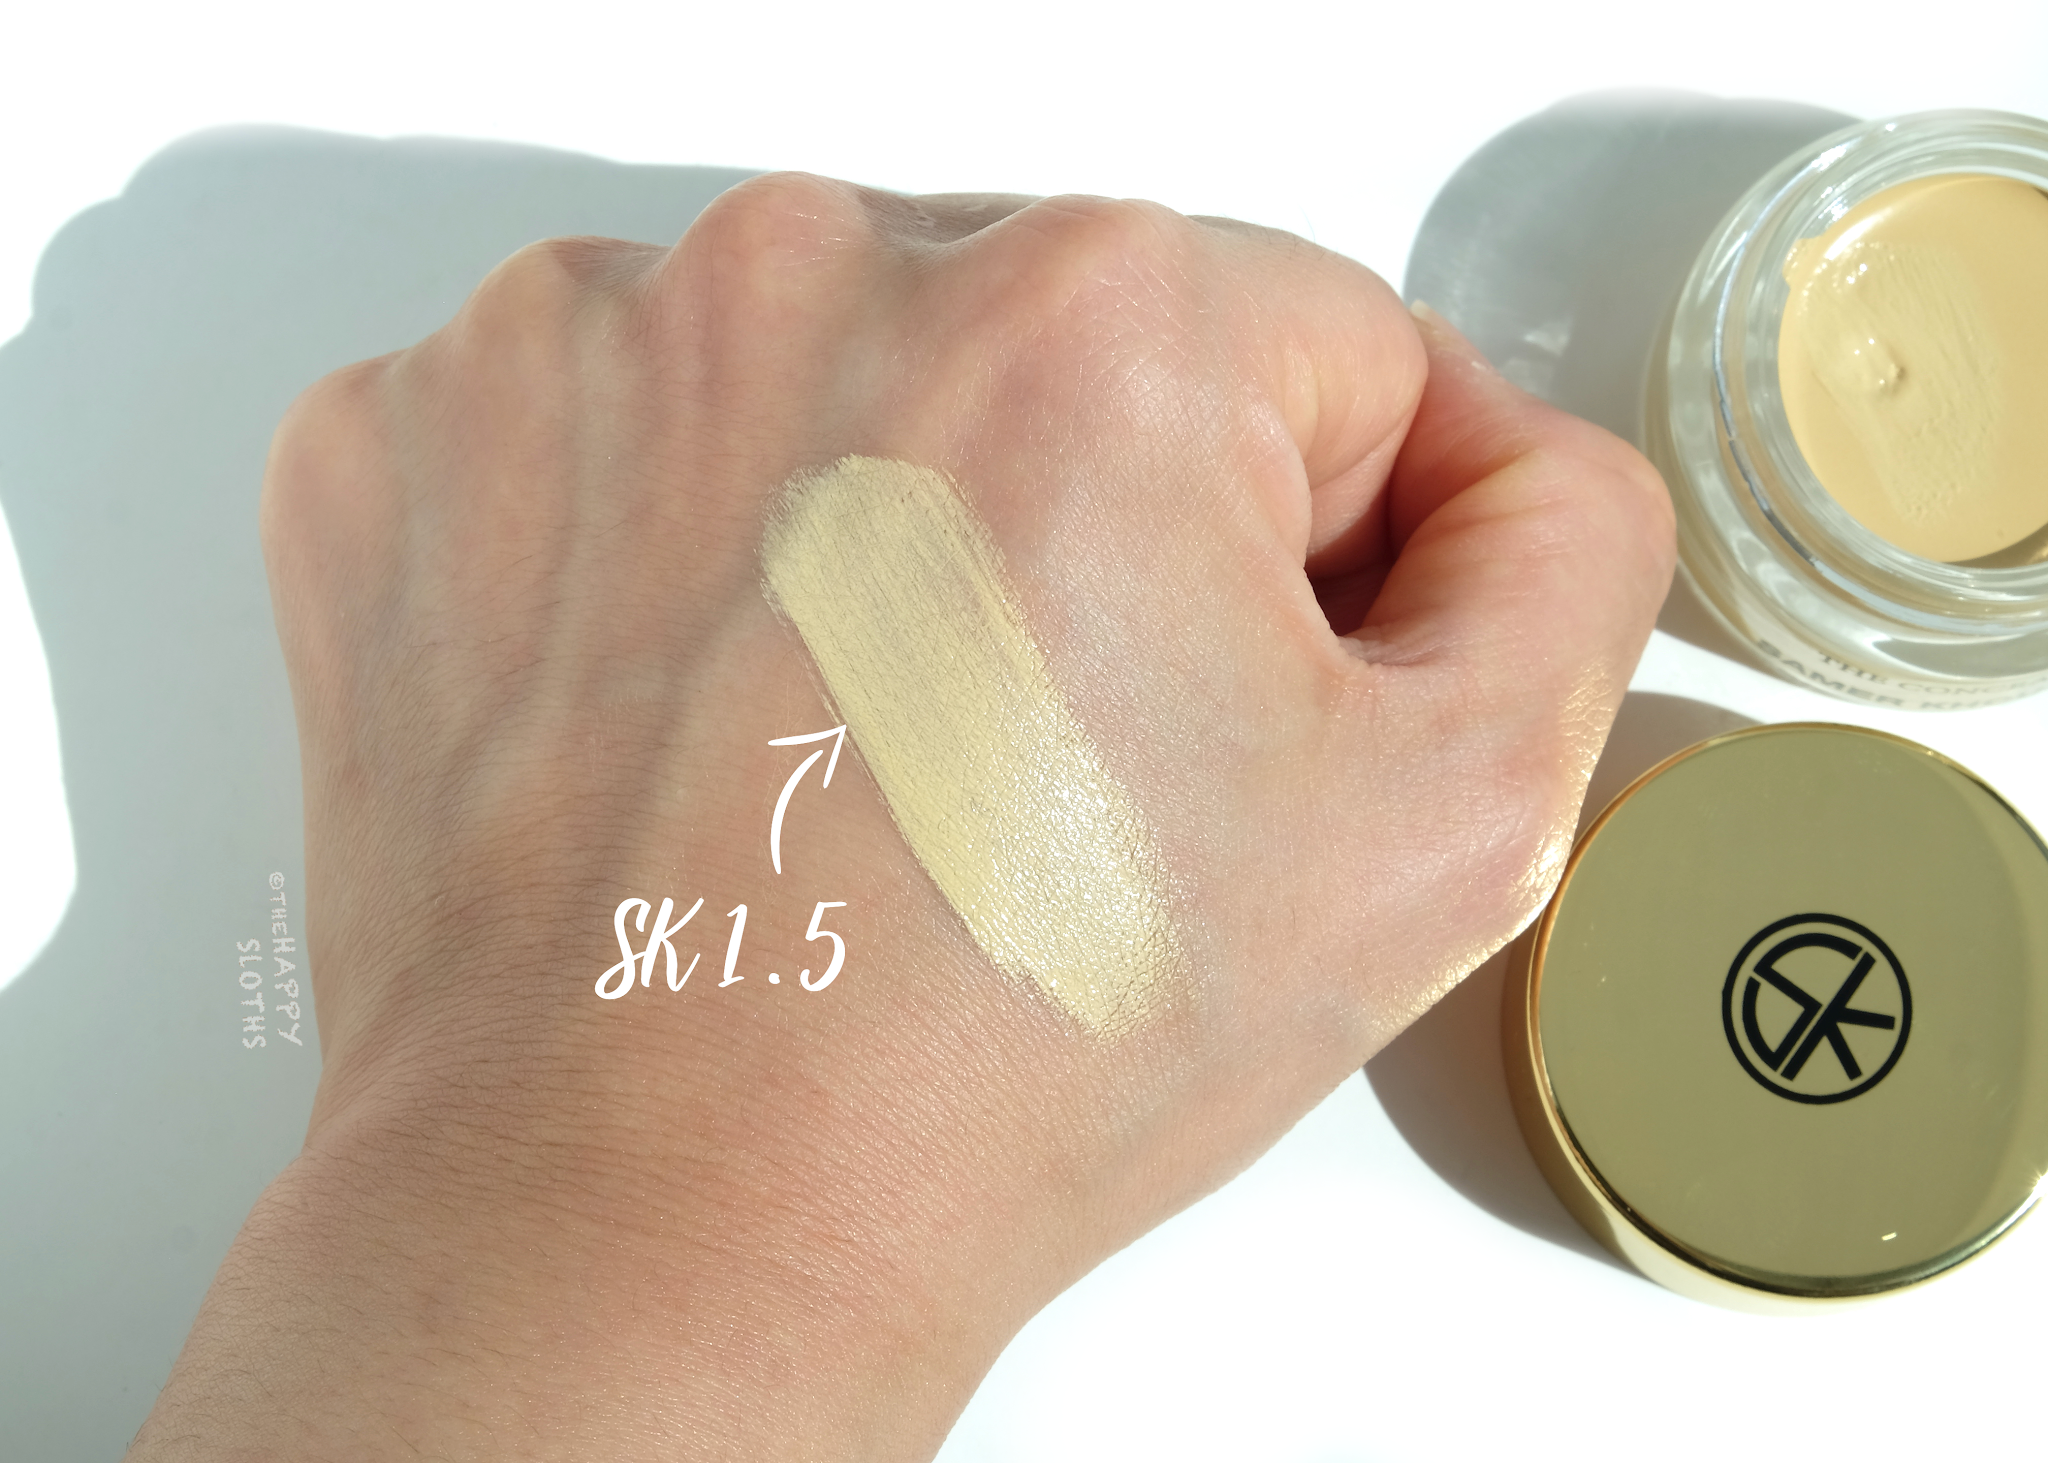 Samer Khouzami | The Concealer in "SK 1.5": Review and Swatches